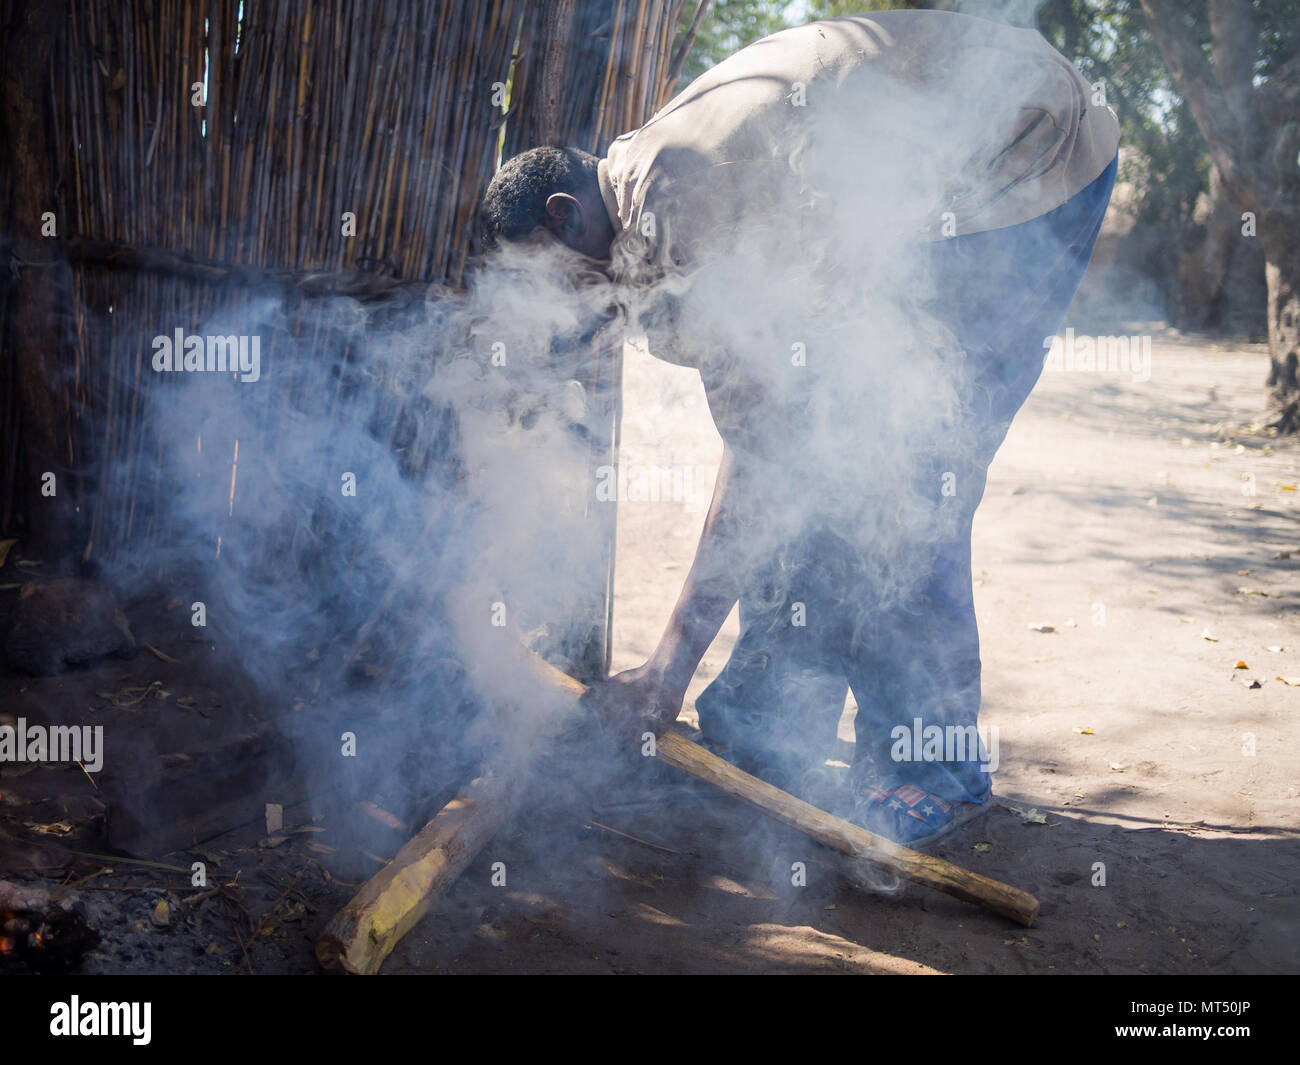 Luzibalule, Namibia - August 13, 2015: Unidentified African man operating traditional forge at Lizauli Traditional Village Stock Photo